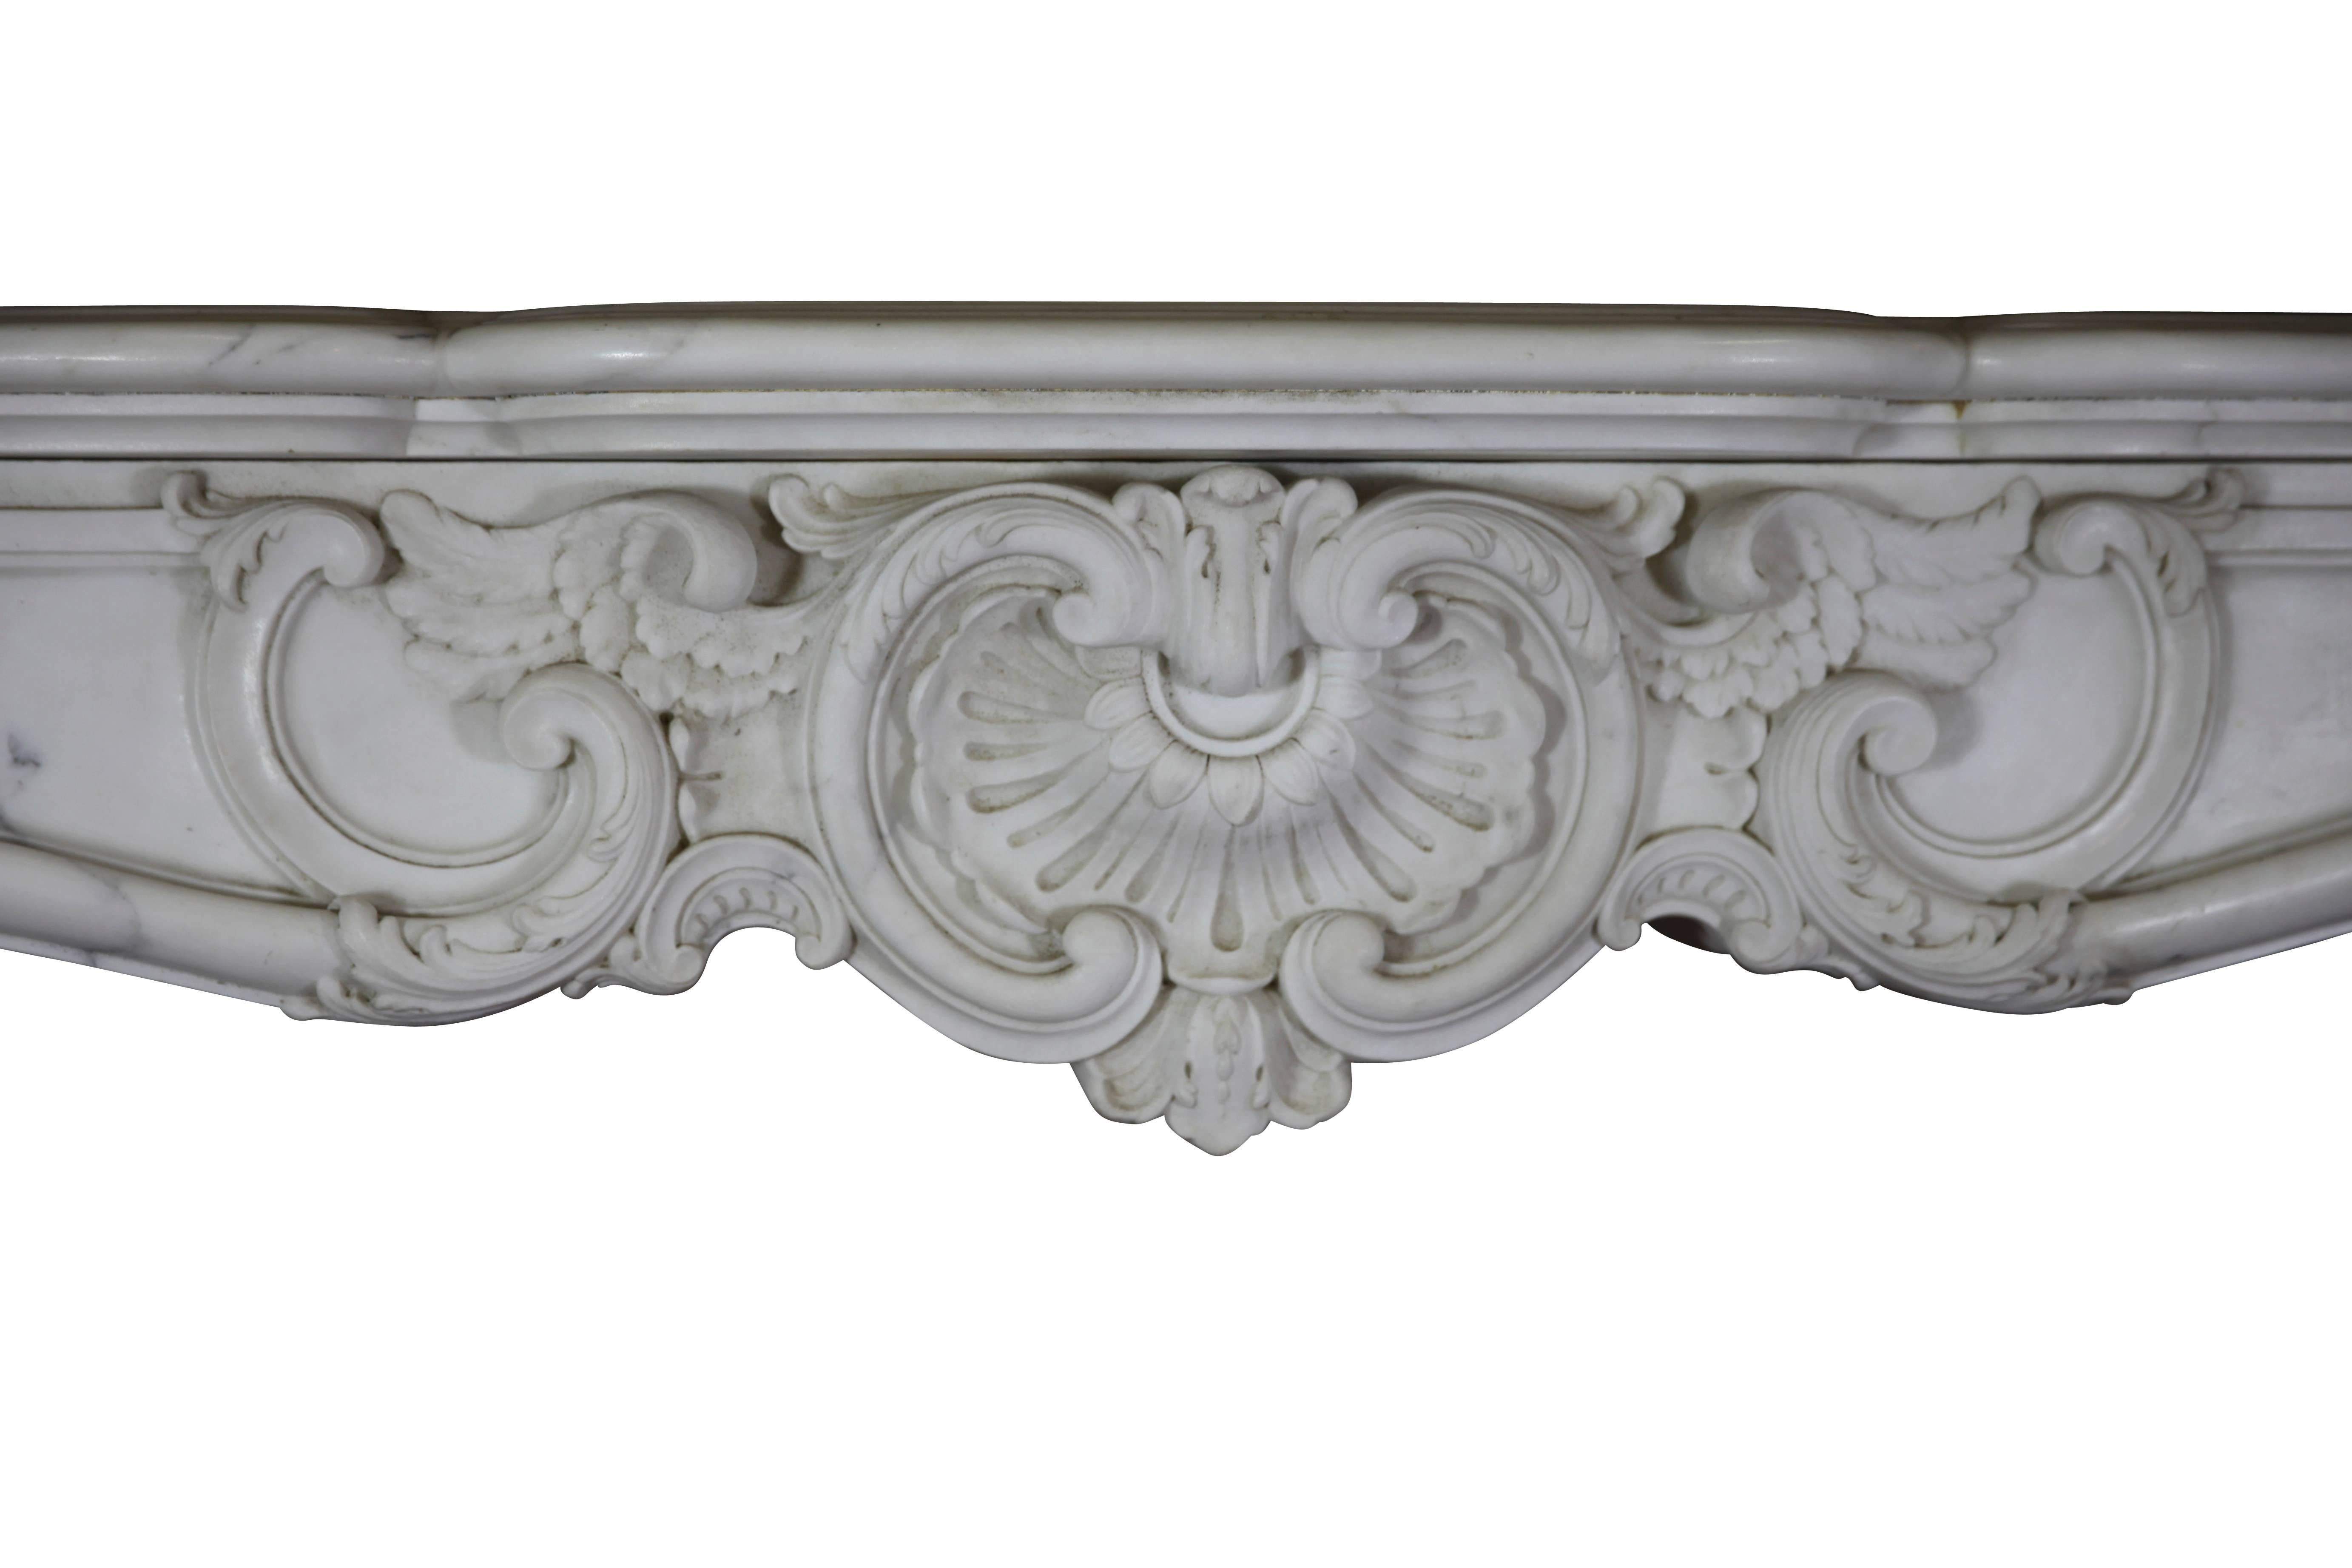 This is one of a kind fireplace surround in Carrara marble was made by special order for the Castle of Fontainebleau. The identical but in grey mantel was installed in the Castle of Fontainebleau. 
It was build in the Empire period. The typical